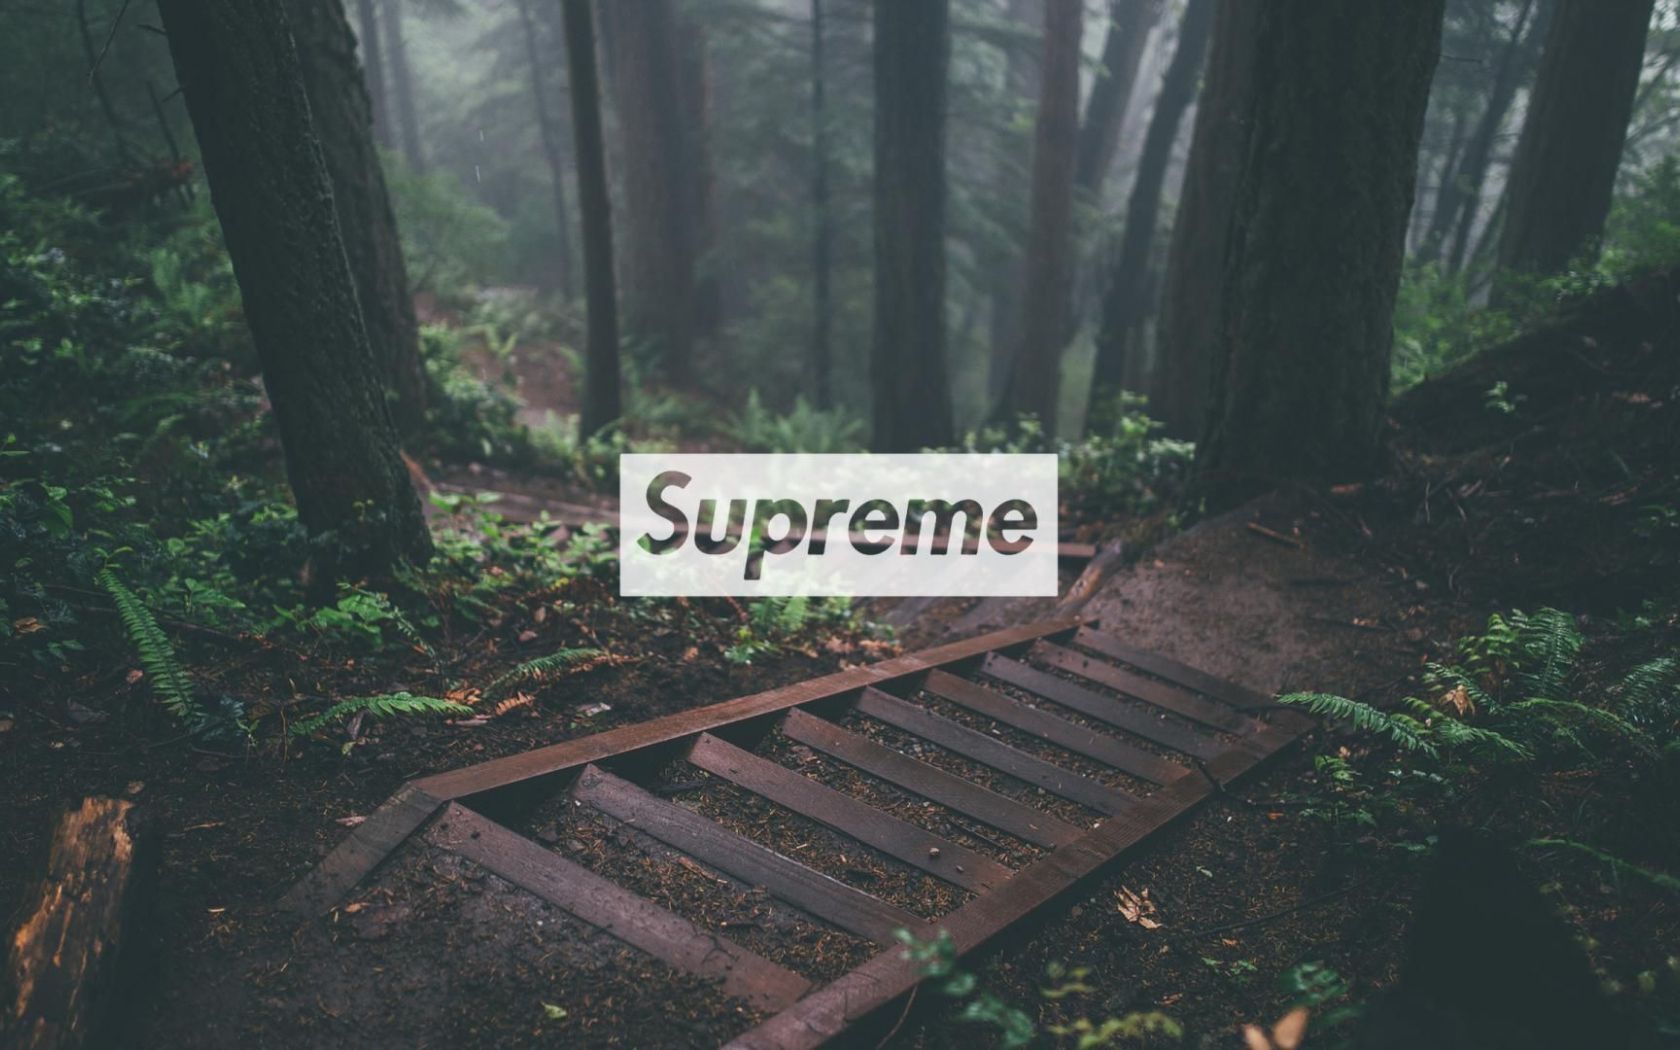 Free download Hypebeast PC Wallpaper Top Hypebeast PC Background [1920x1080] for your Desktop, Mobile & Tablet. Explore Supreme PC Wallpaper. Supreme PC Wallpaper, Supreme Wallpaper, Supreme Wallpaper